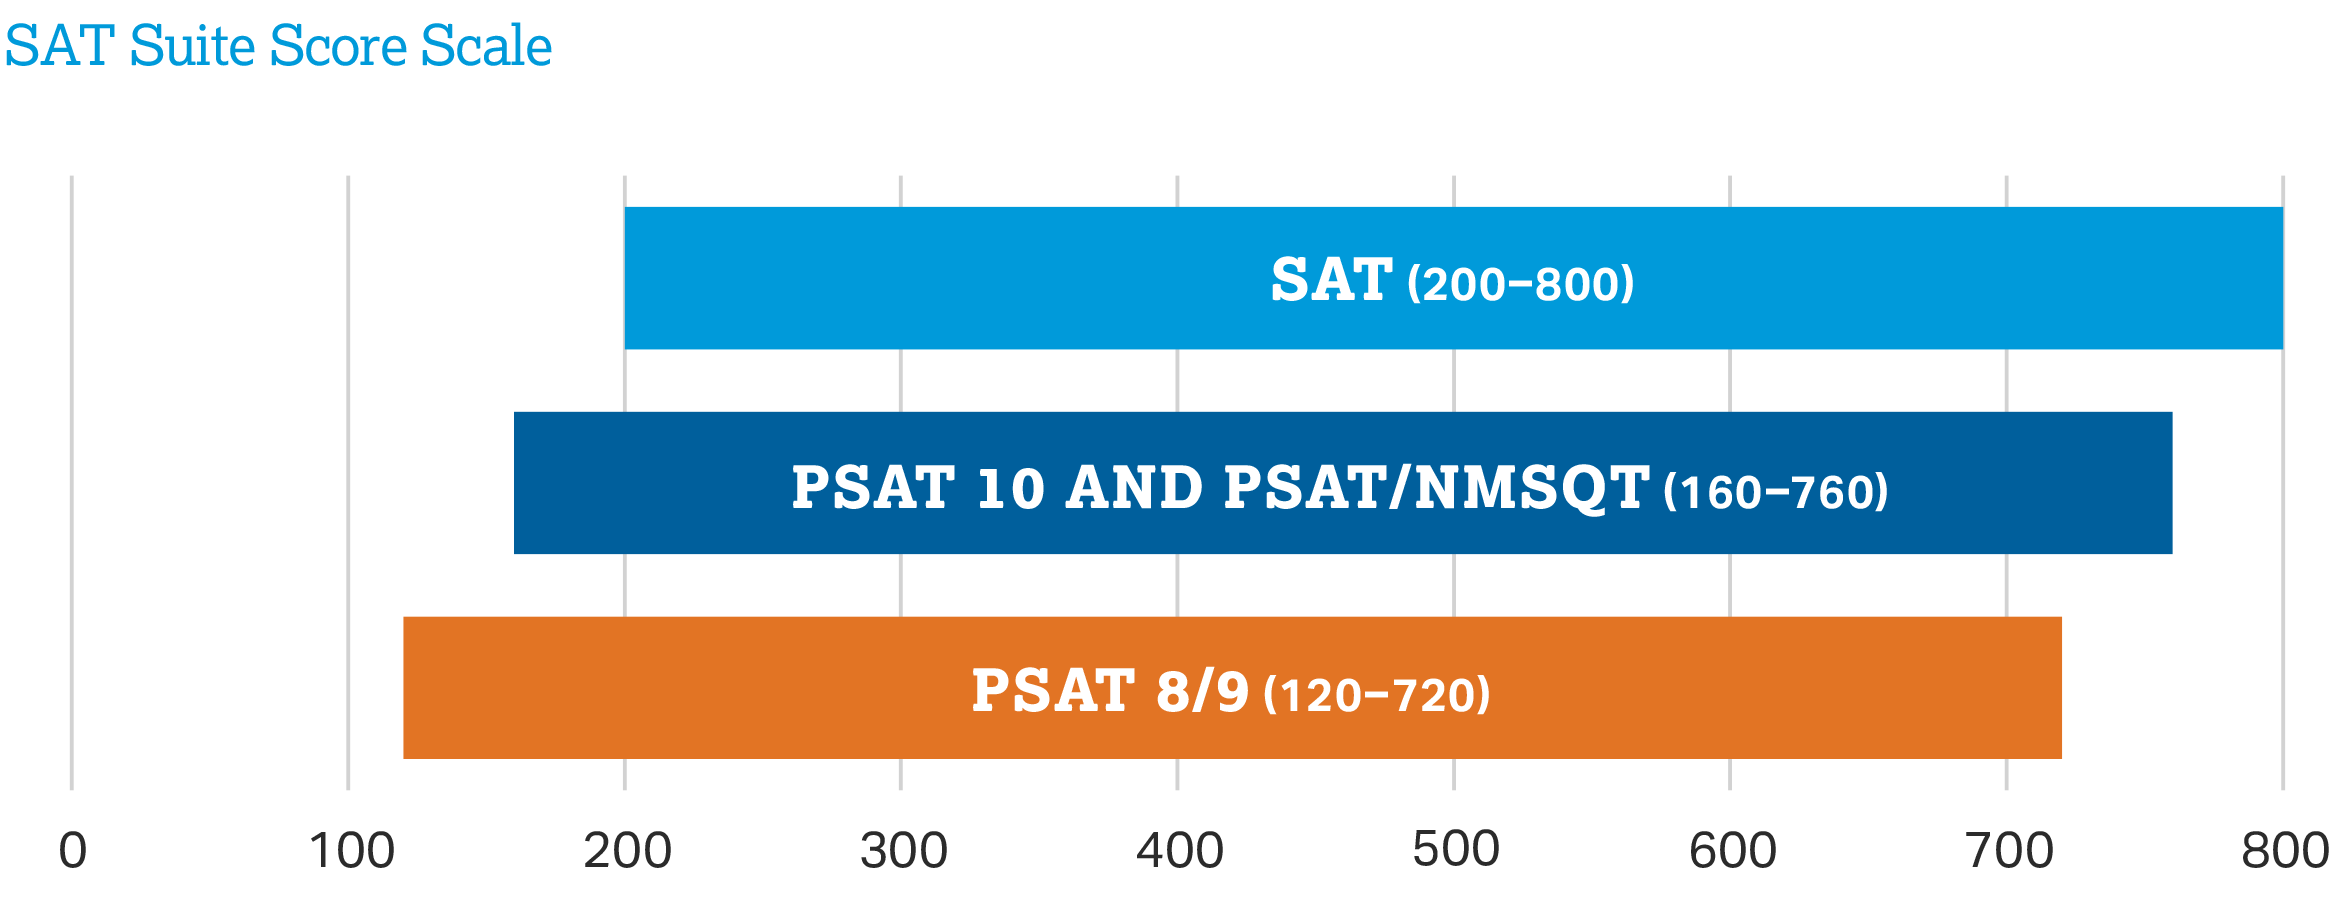 For illustrative purposes only, bar graphs in 3 different colors represent the three assessments and their proposed scoring ranges. Light blue: SAT, score range 200-800. Dark blue, PSAT 10 and PSAT/NMSQT, score range 160-760. Gold: PSAT 8/9, score range 120-720. A plotted line below the bars shows a potential overall score range from 120-800. Vertical markers at 3 score points illustrate grade-level benchmarks that will determine whether students are making on target progress toward the SAT benchmark.